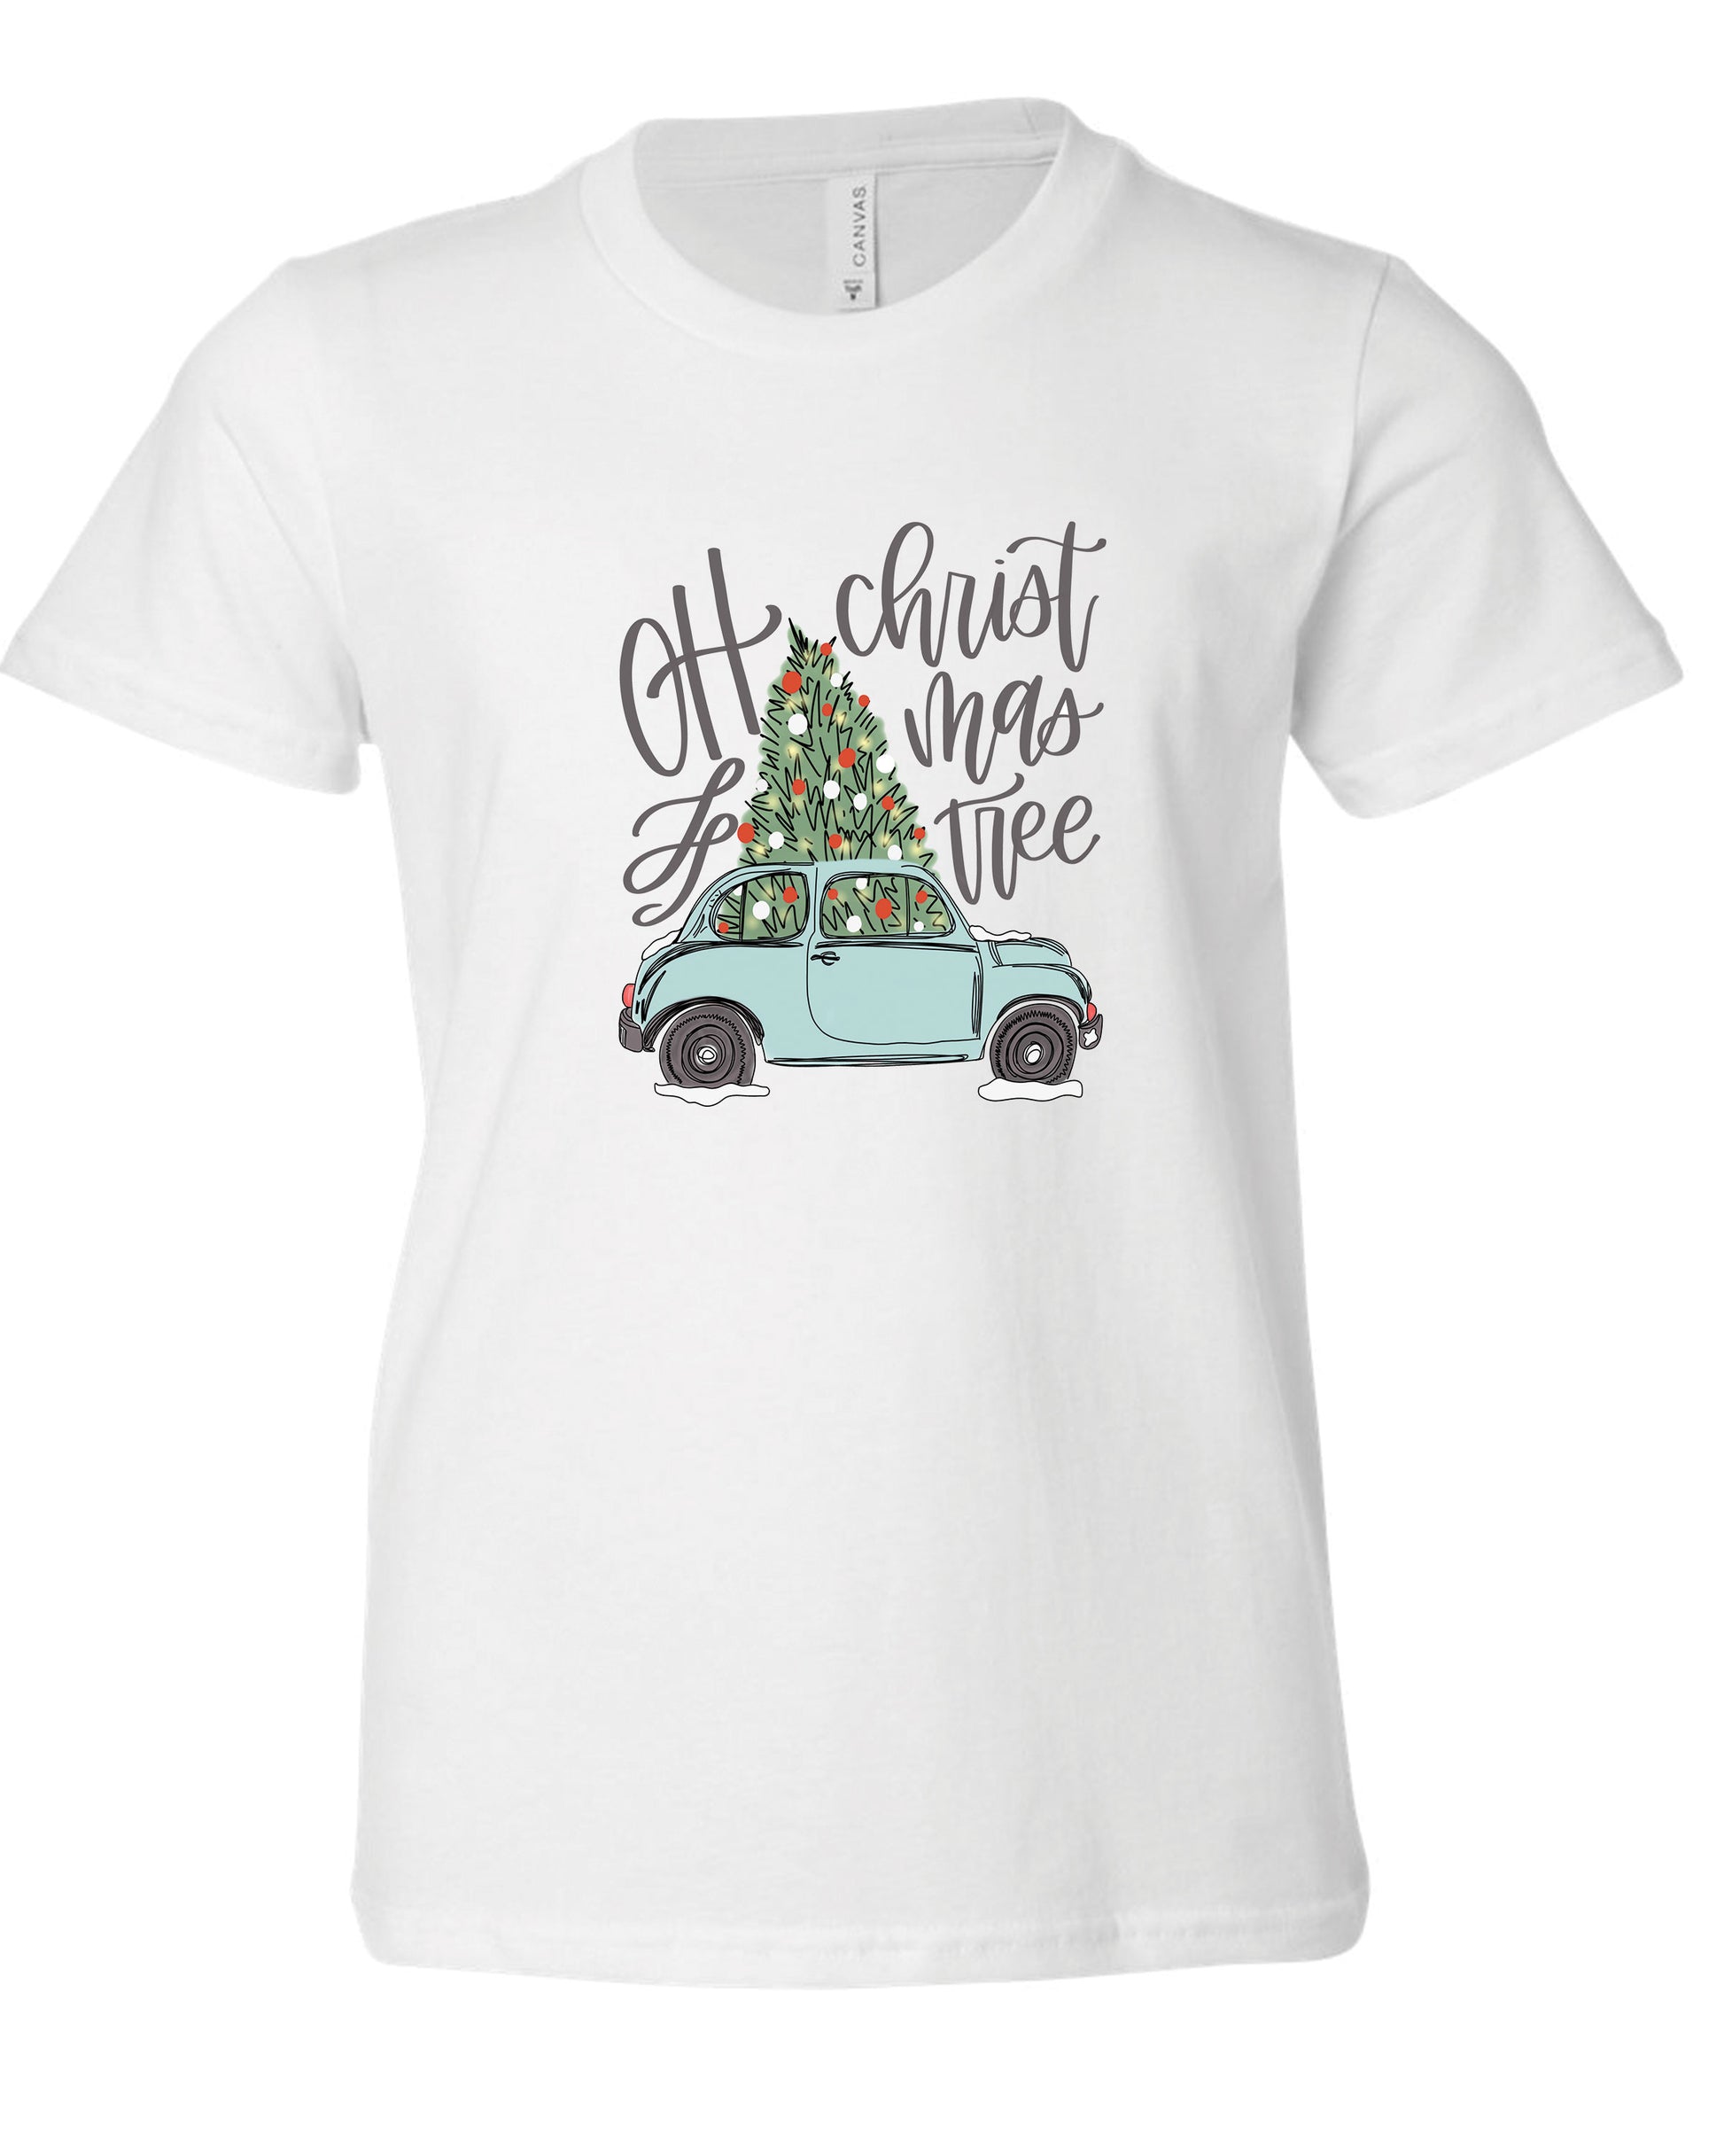 Oh Christmas Tree | Kids Tee-Kids Tees-Sister Shirts-Sister Shirts, Cute & Custom Tees for Mama & Littles in Trussville, Alabama.